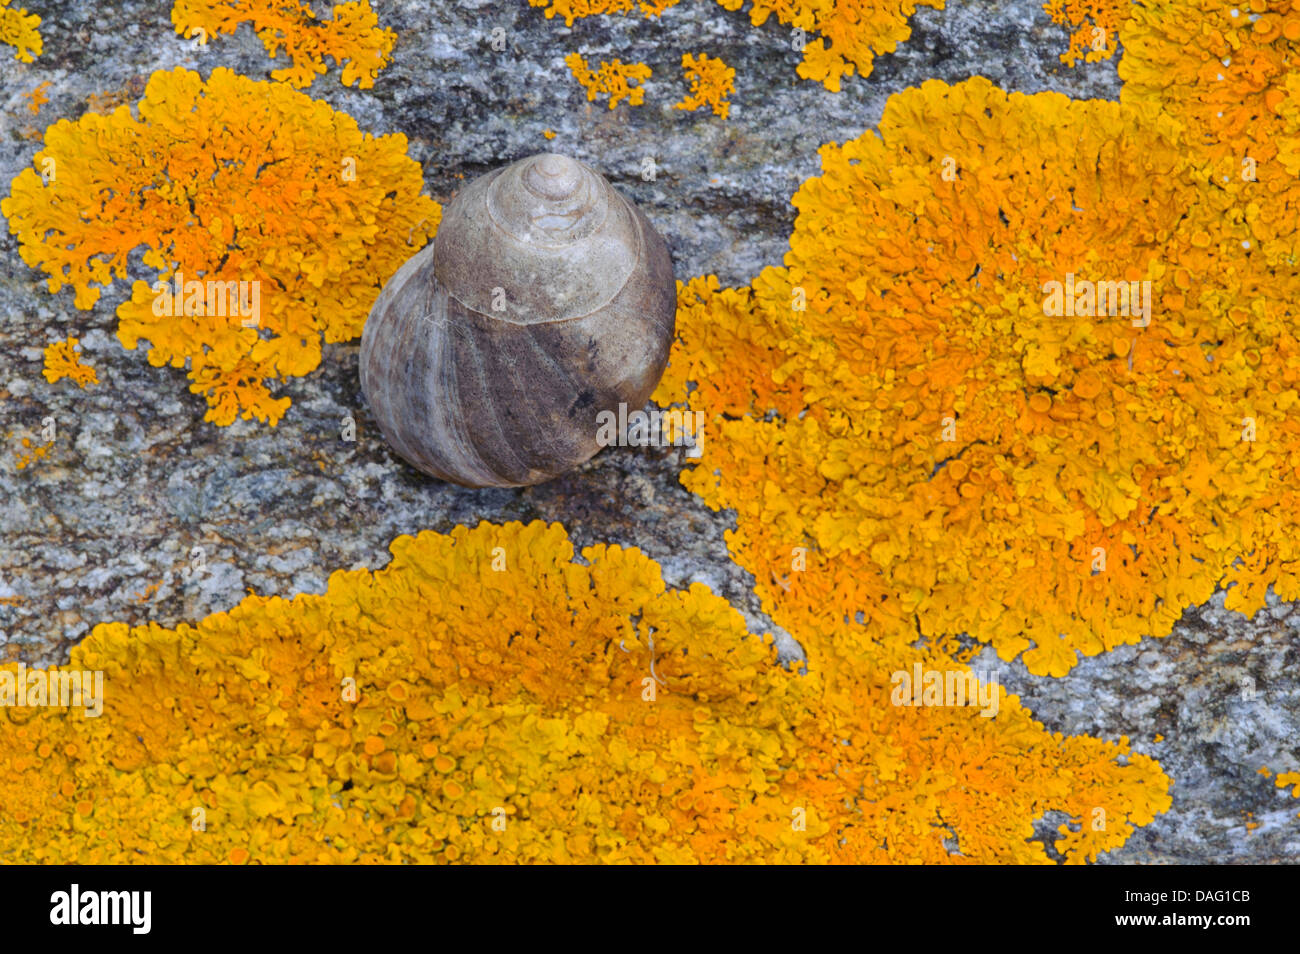 whelks (Buccinidae), snail on a lichened coast rock, Norway Stock Photo